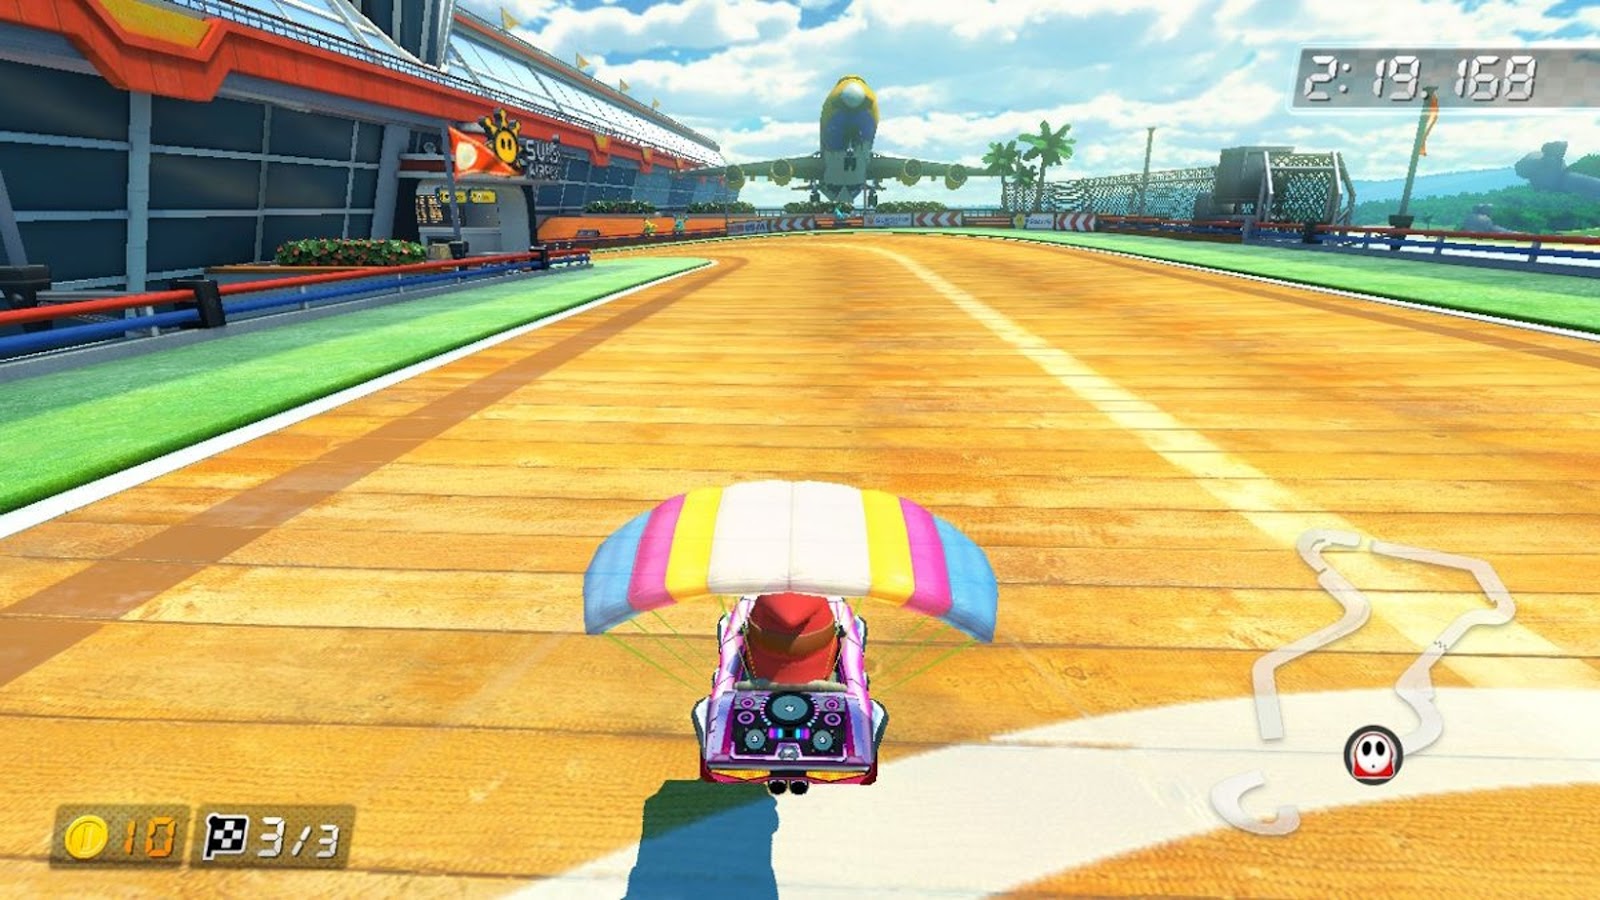 How Mario Kart 8 For Wii Compares To Other Games